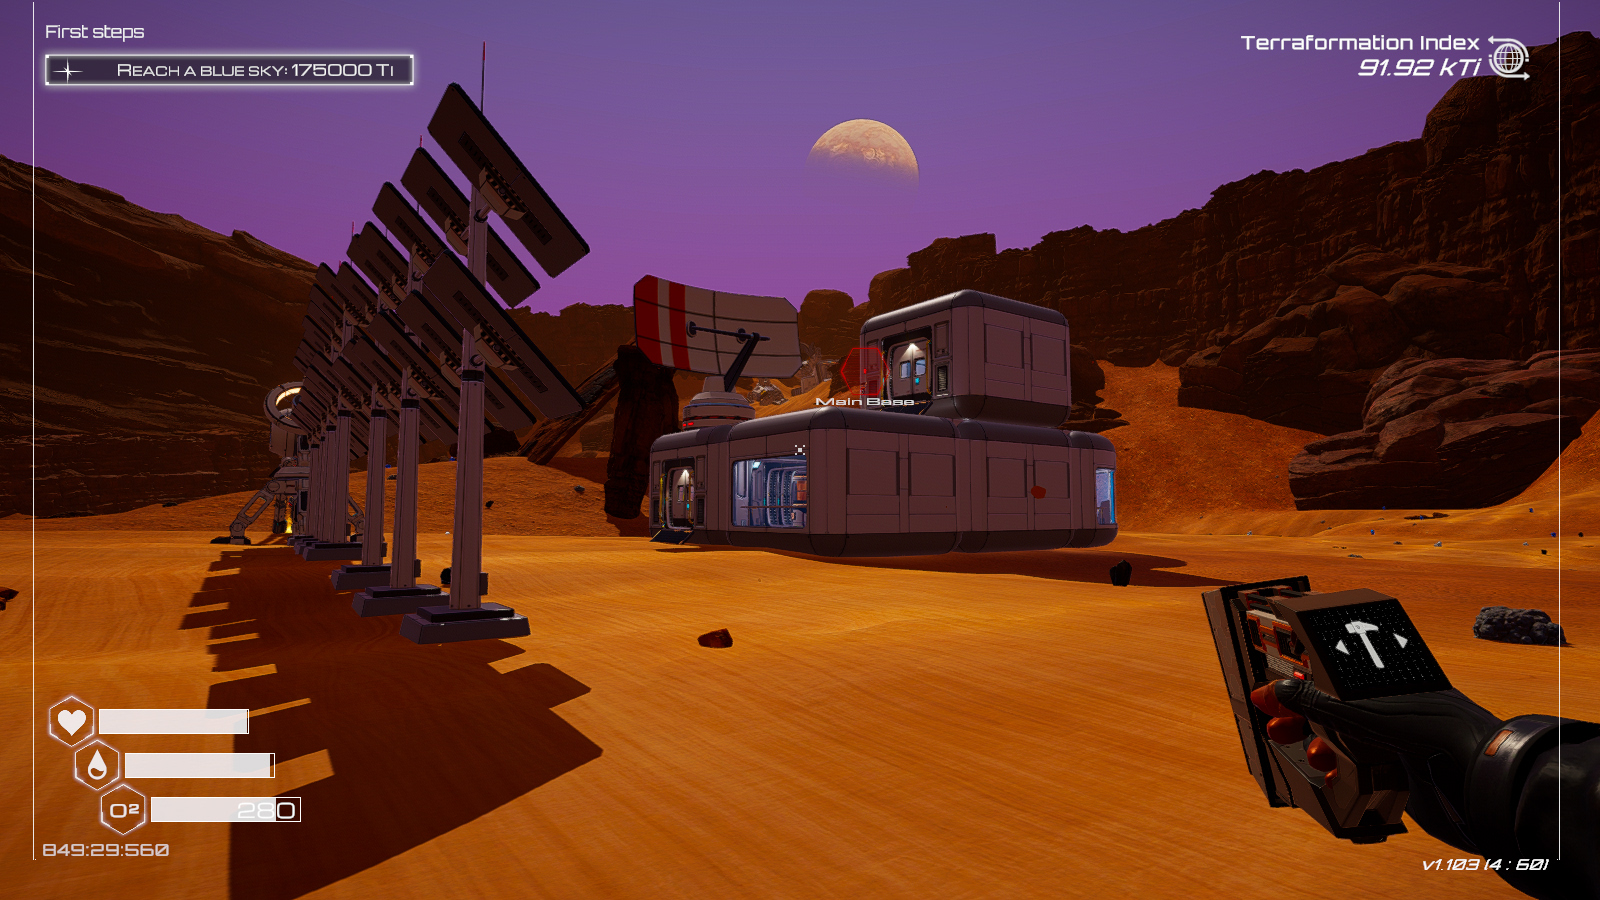 A screenshot of Planet crafter, pretty early in the game